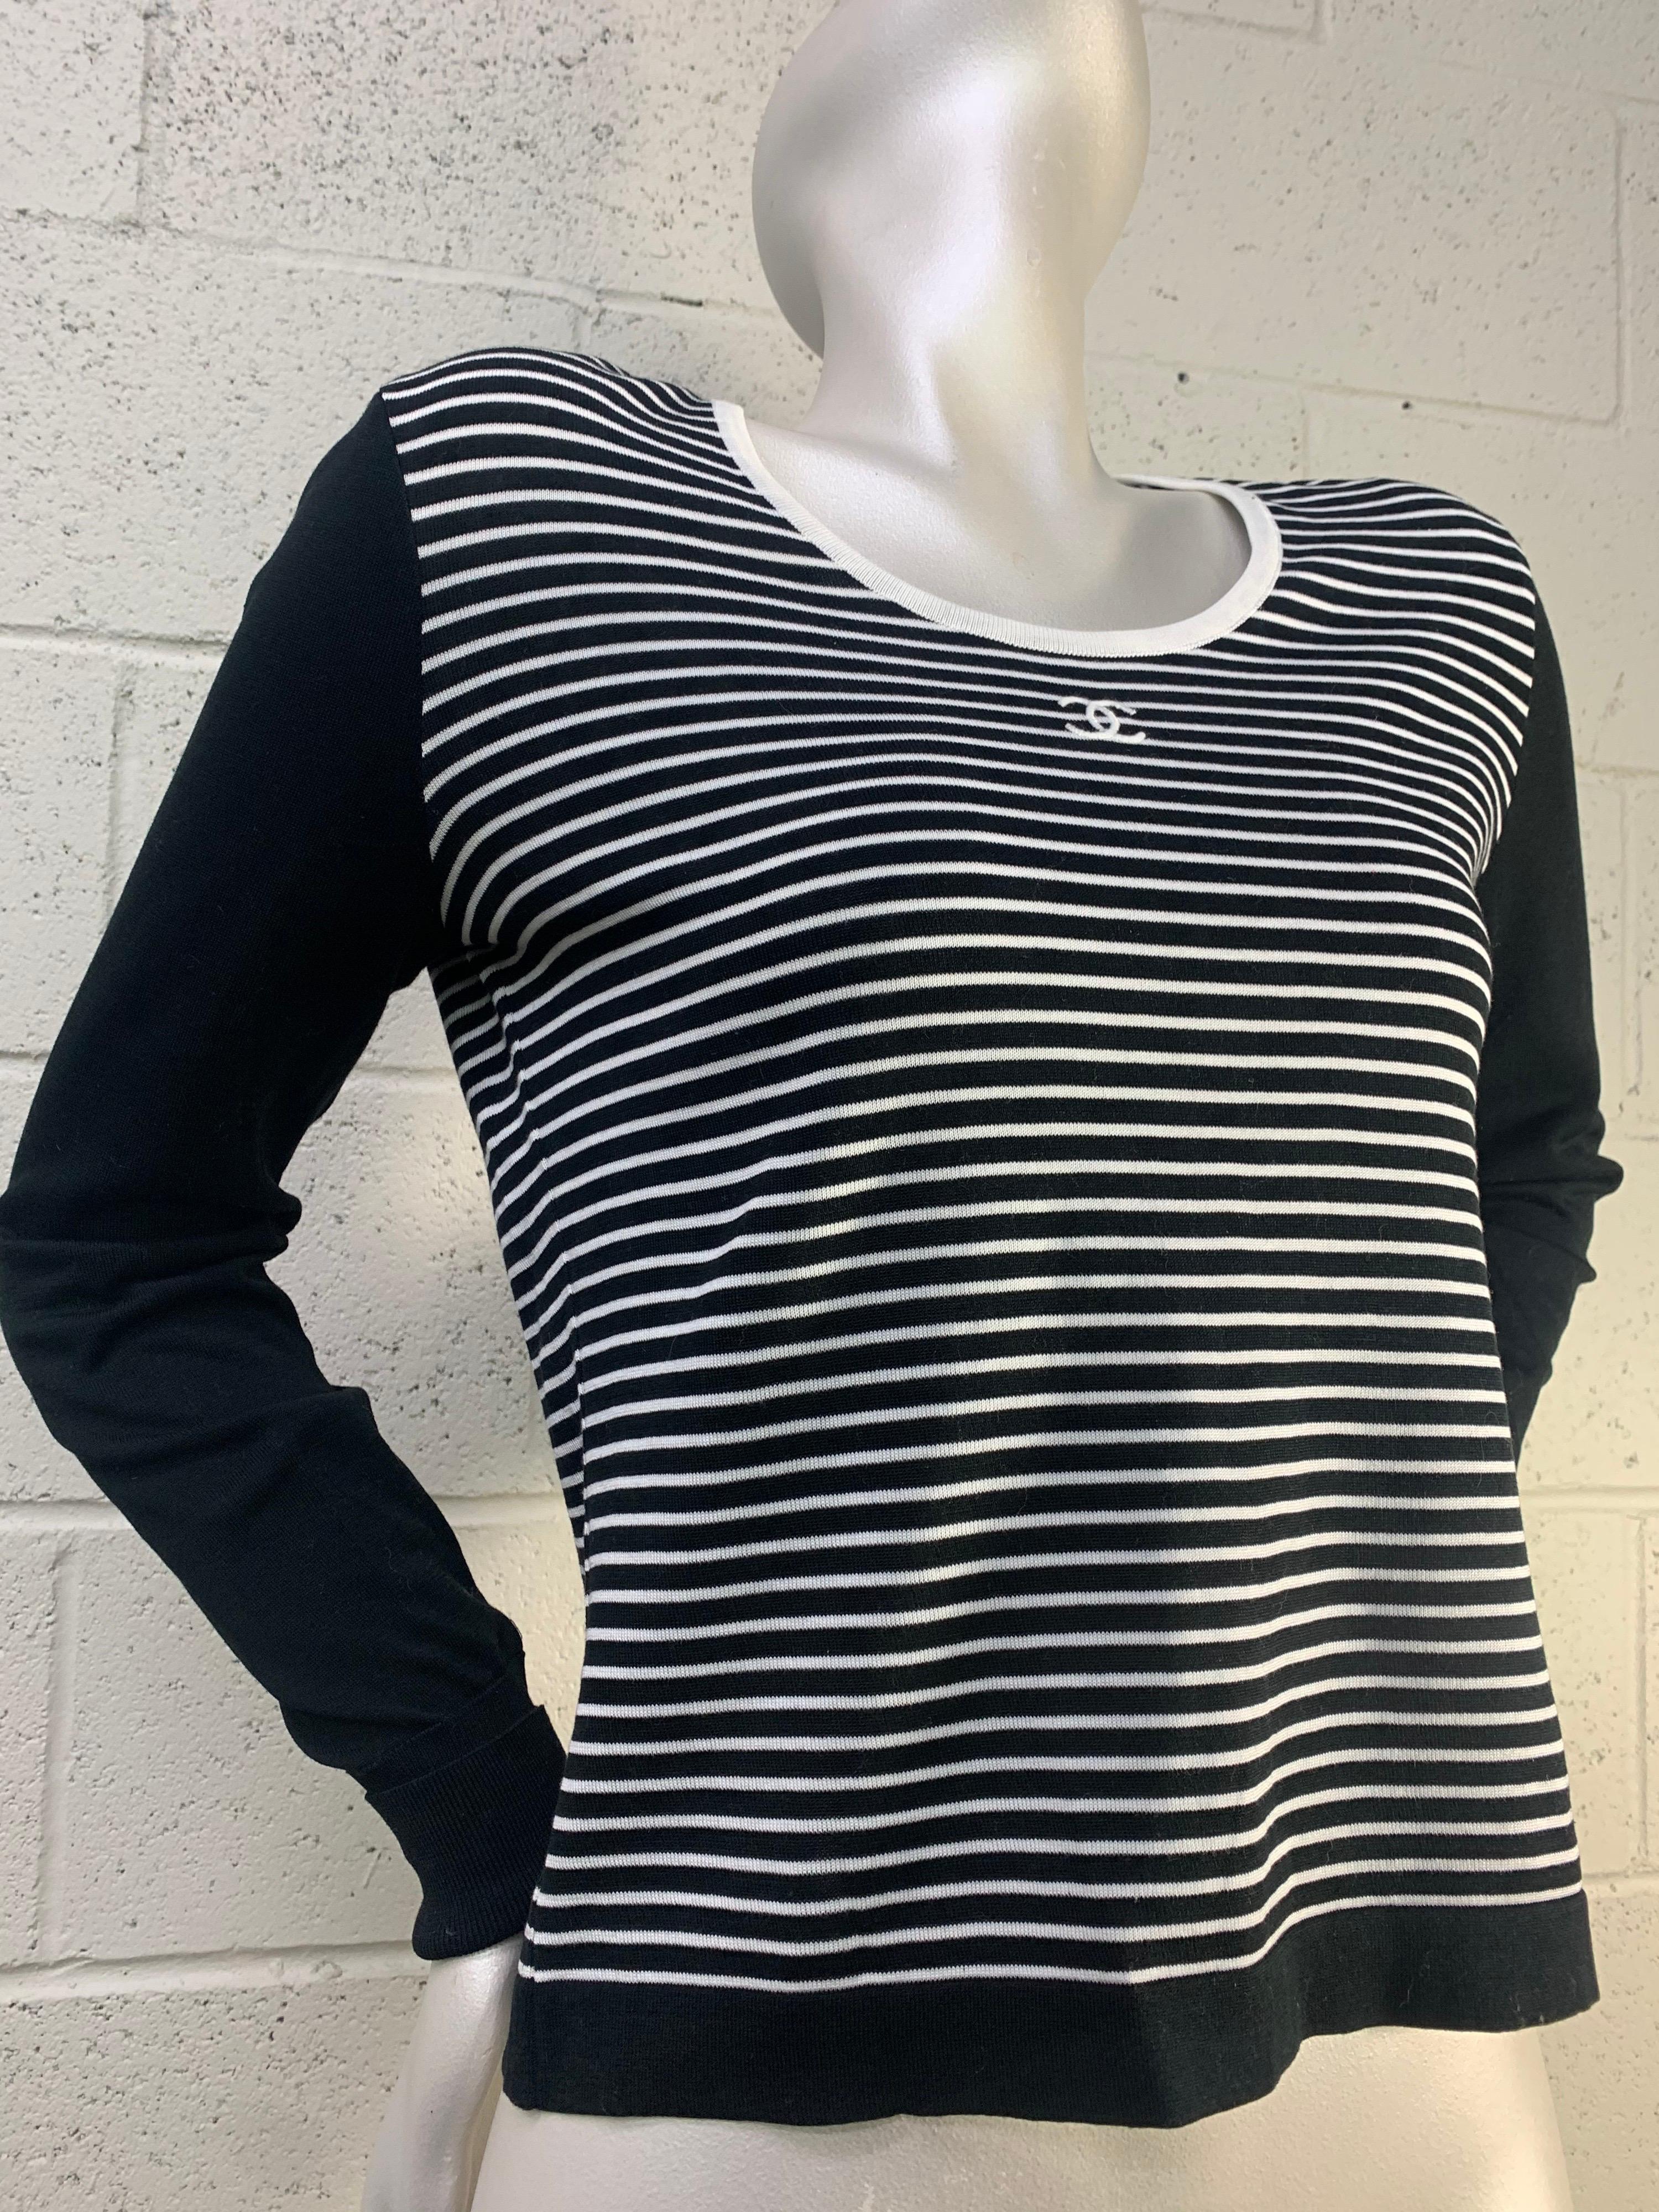 A wonderfully classic 1990s Chanel black and white cotton rib knit nautical striped pullover top with 